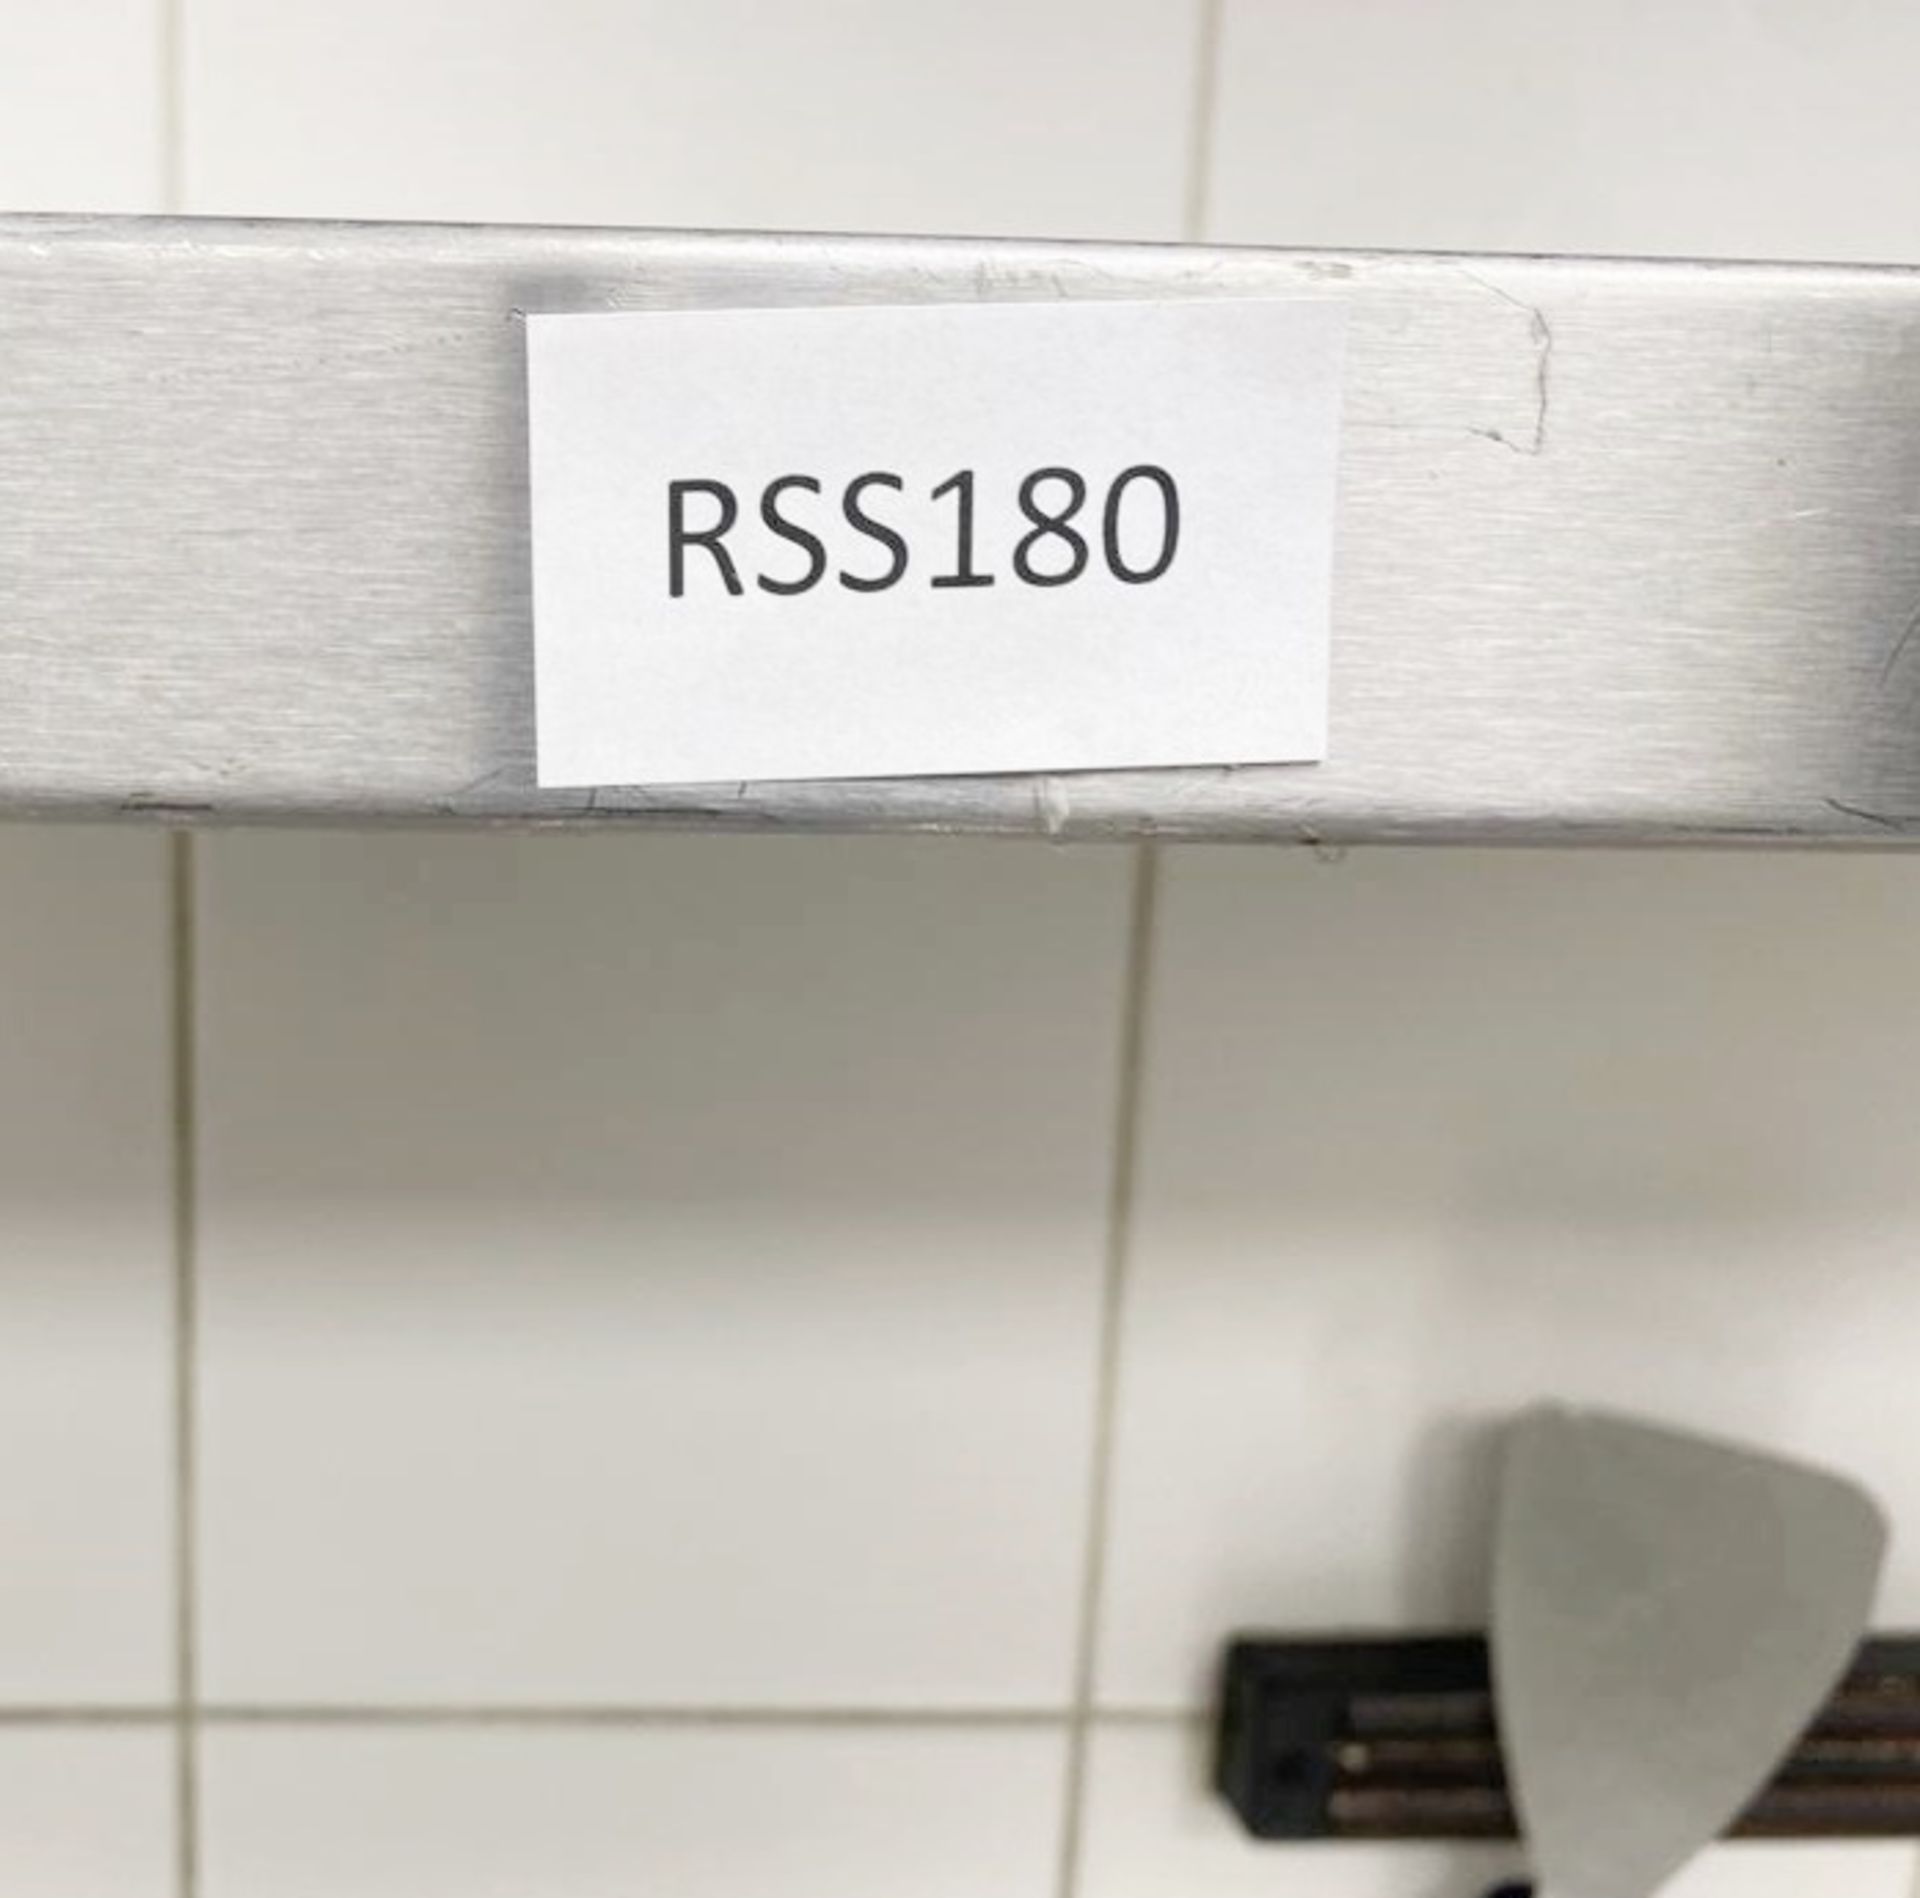 2 x Stainless Steel Food Preparation Shelves - Approx: 2 x 1400mm - Ref: RSS180 - CL835 - Southend - Image 2 of 2